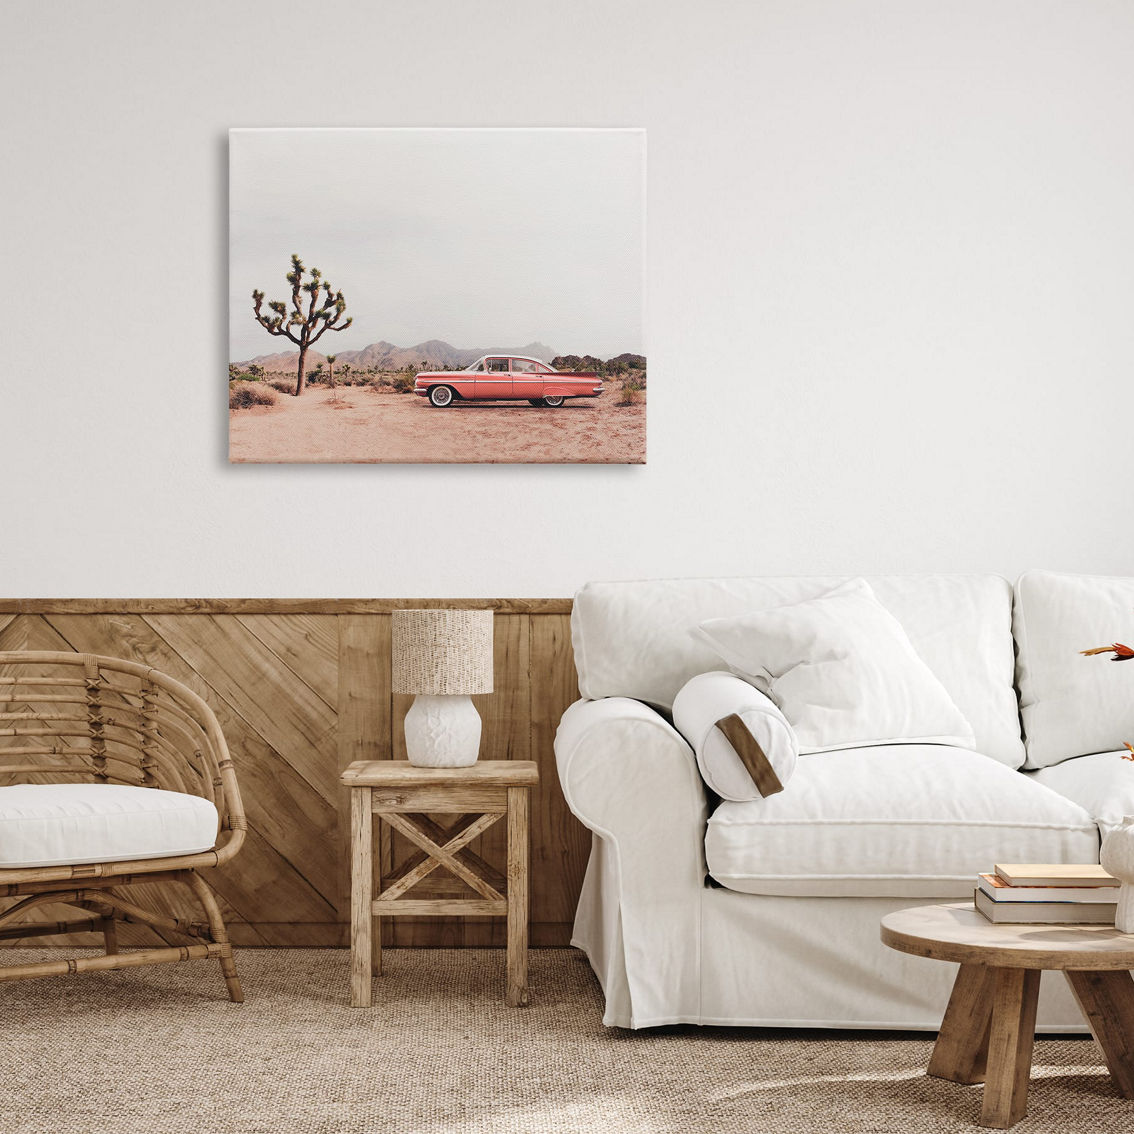 Stupell Canvas Wall Art Vintage Car in Desert Scenery, 30 x 40 - Image 4 of 5